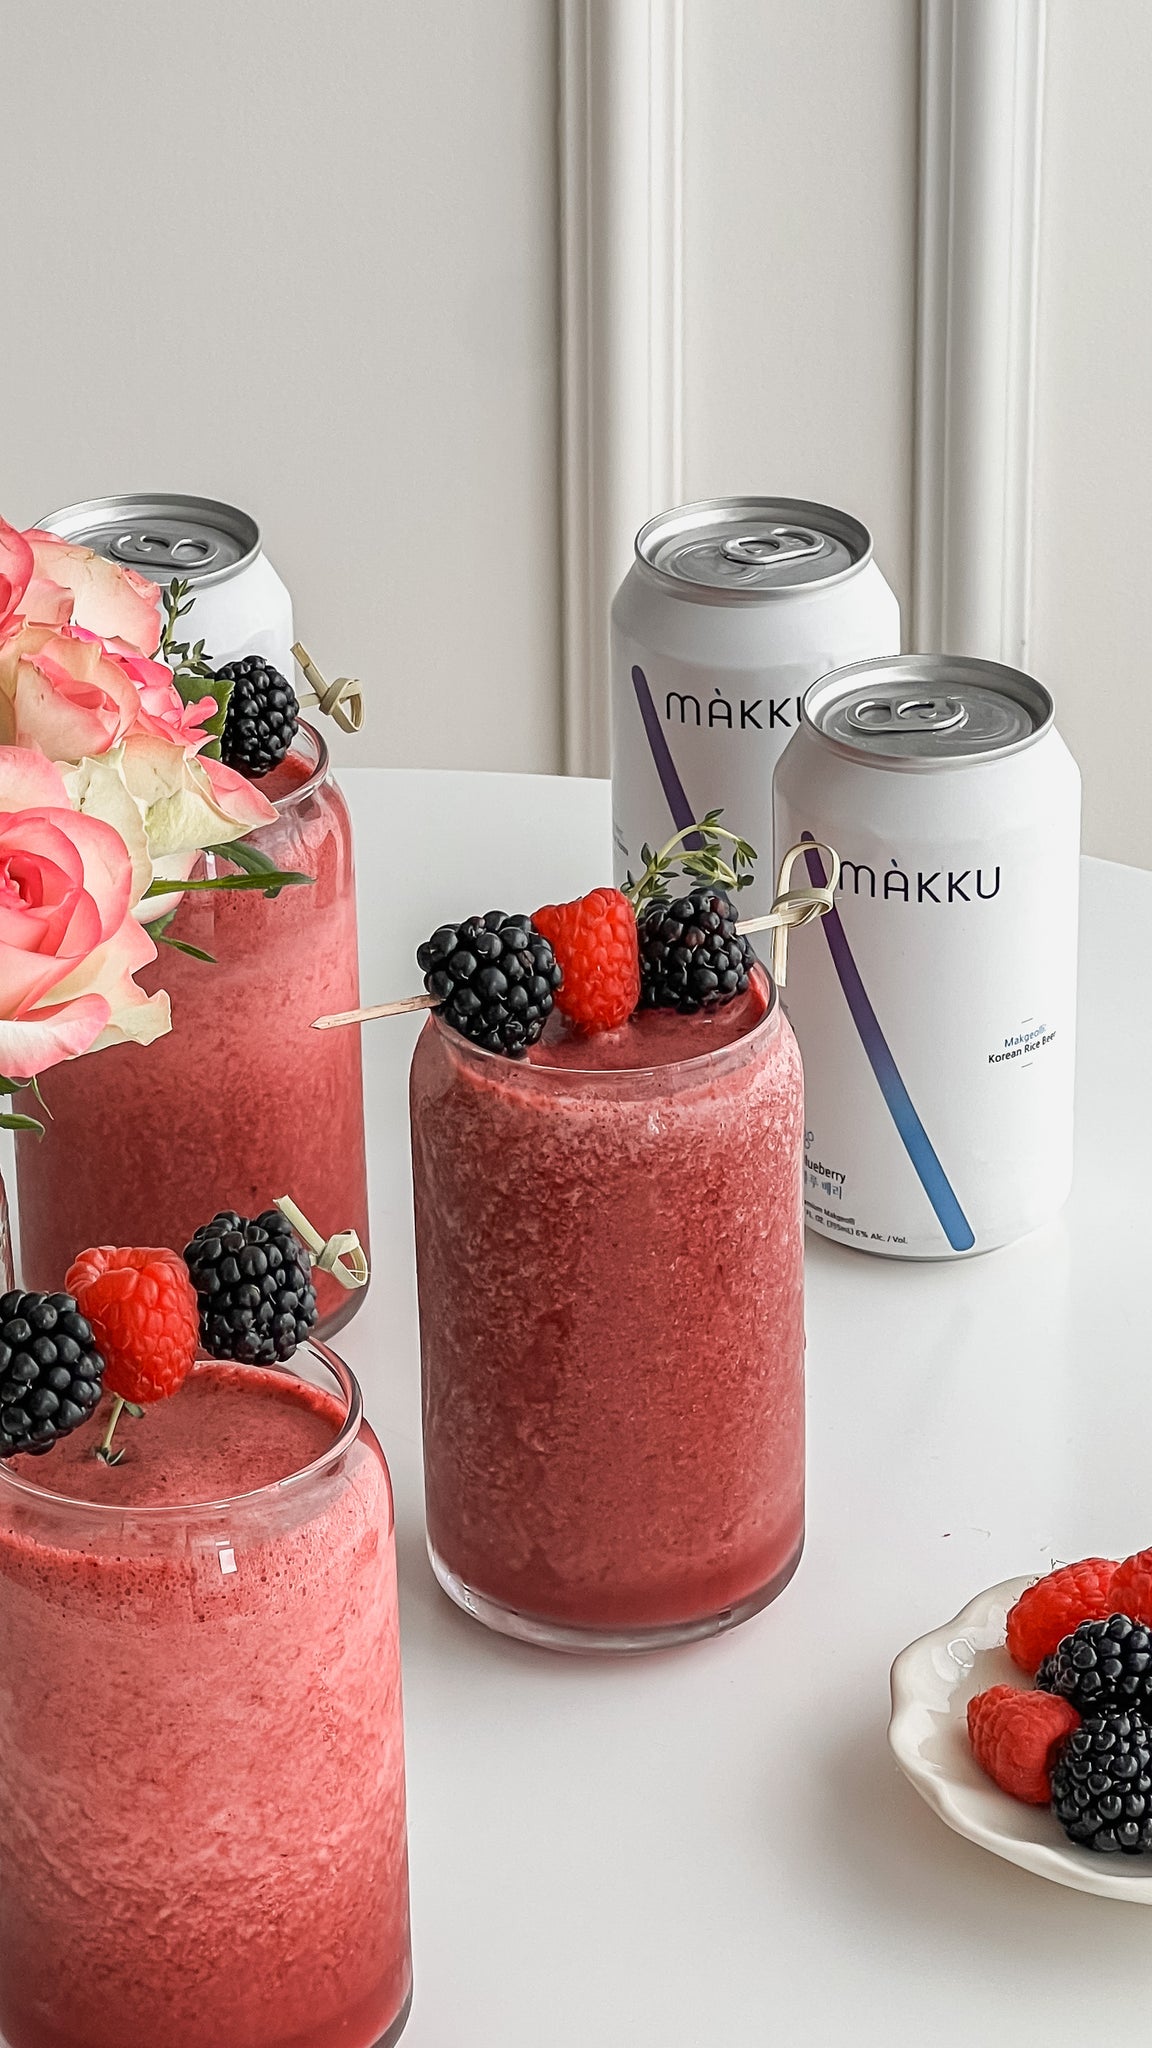 Mixed Berry Màkku Frozie